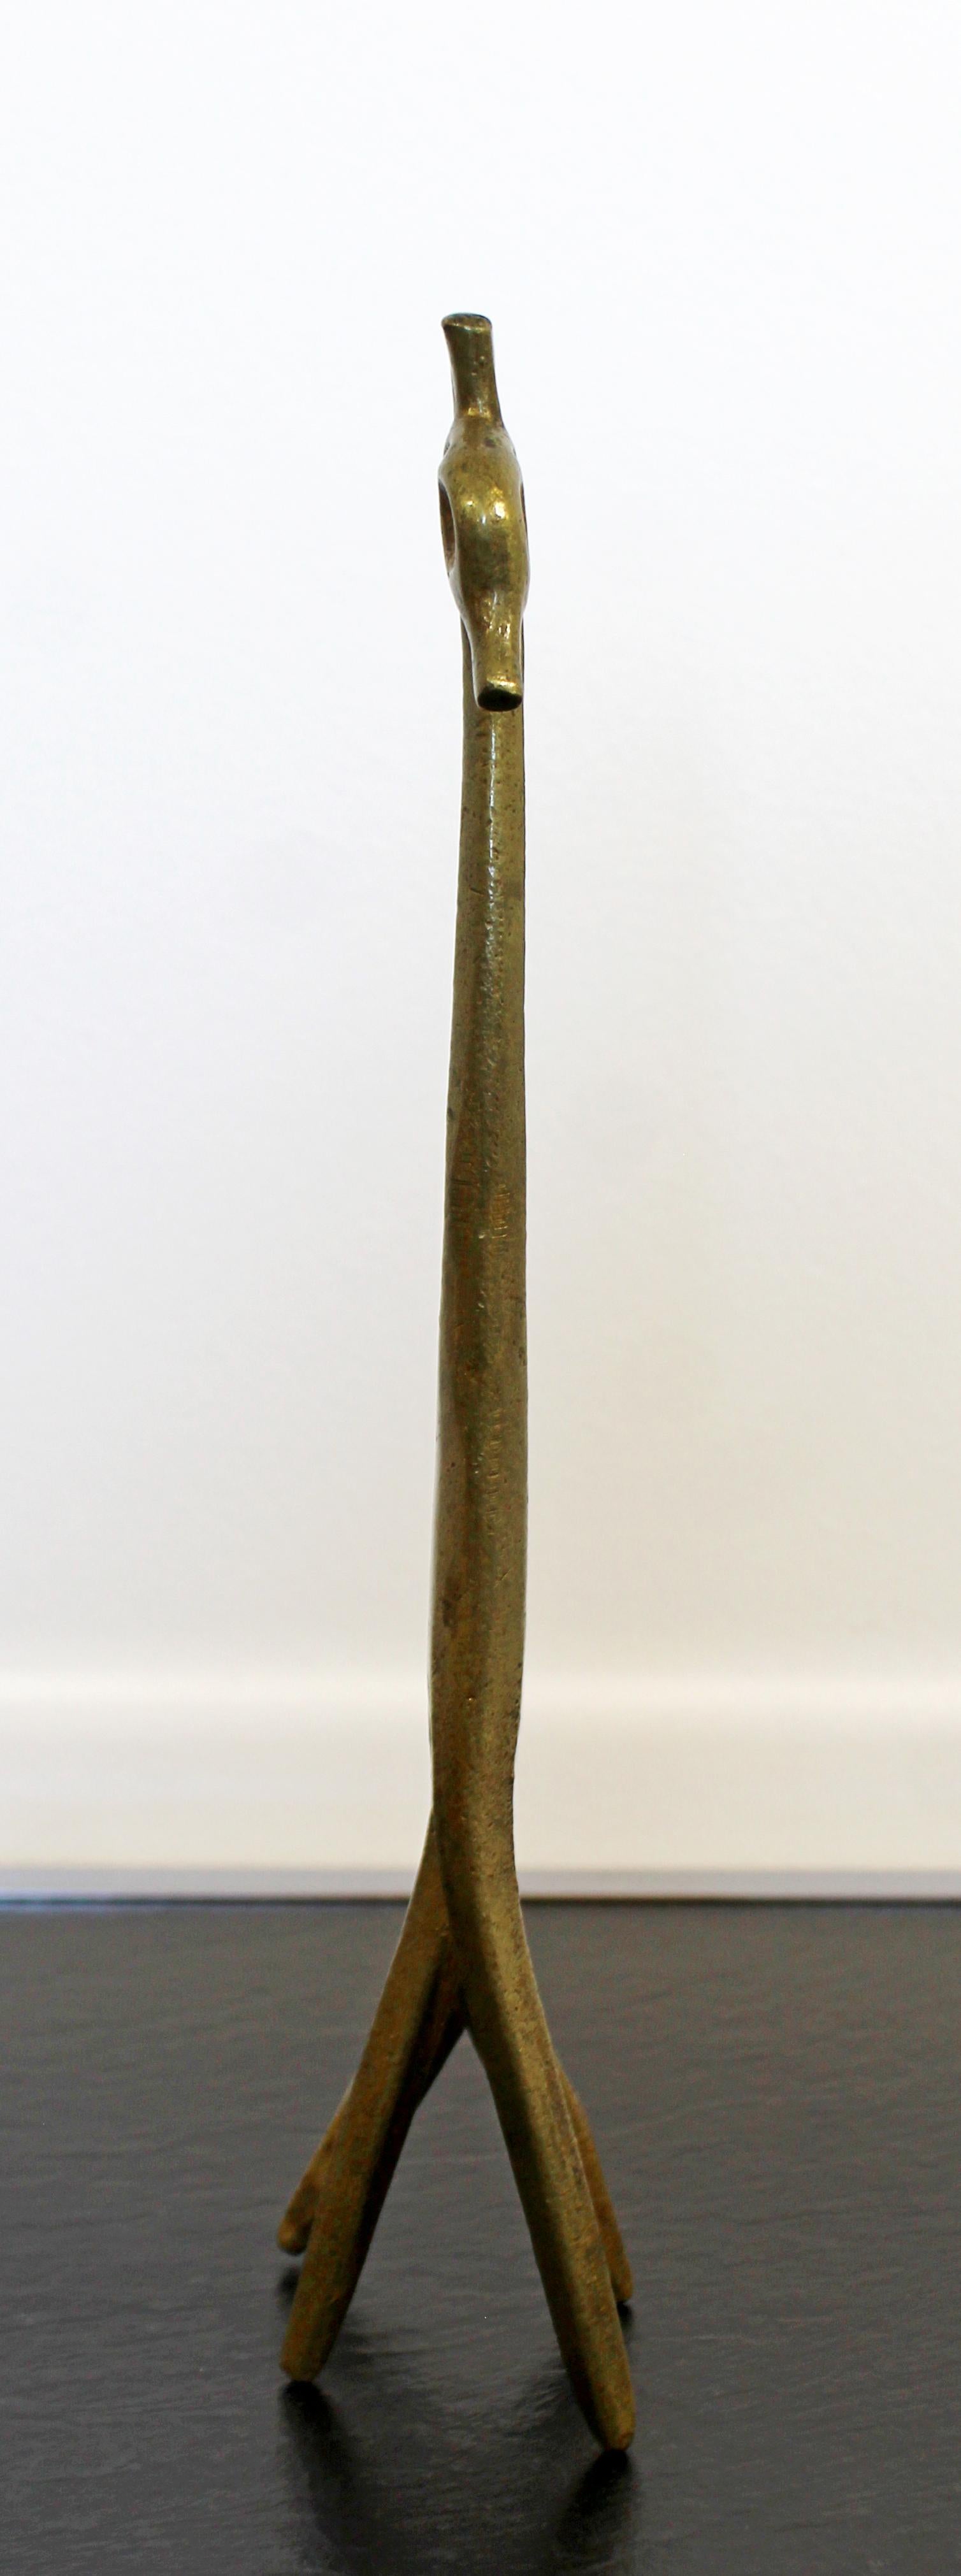 For your consideration is a unique, bronze, Brutalist table sculpture, of a giraffe, signed by Frederick Weinberg, circa 1950s. In excellent vintage condition. The dimensions are 3.5